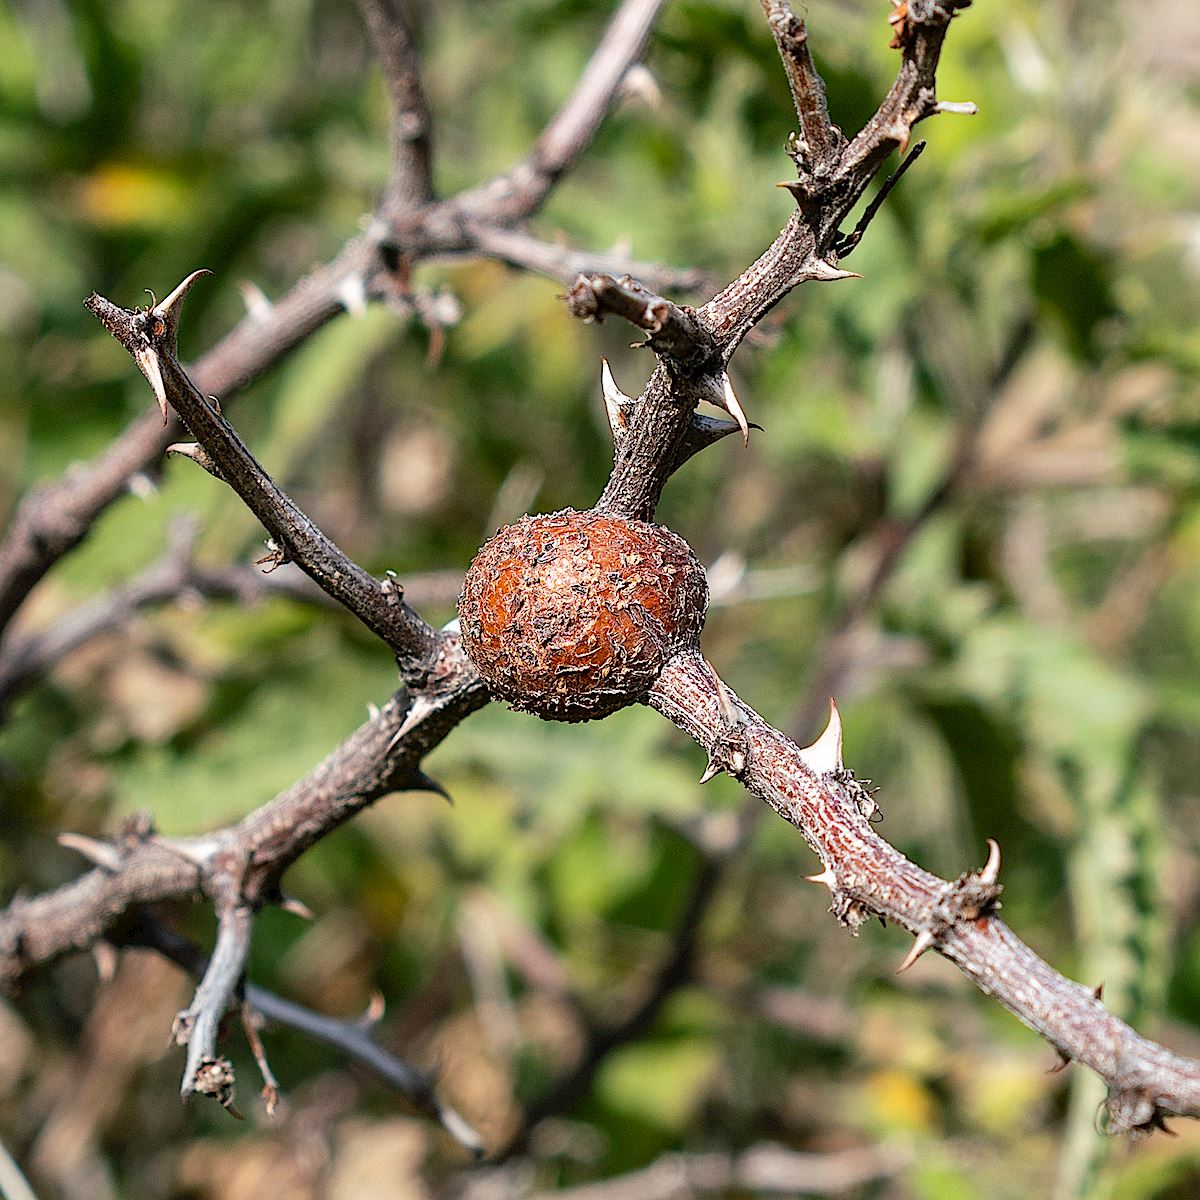 A gall on a Cat's Claw Acacia. February 2019.